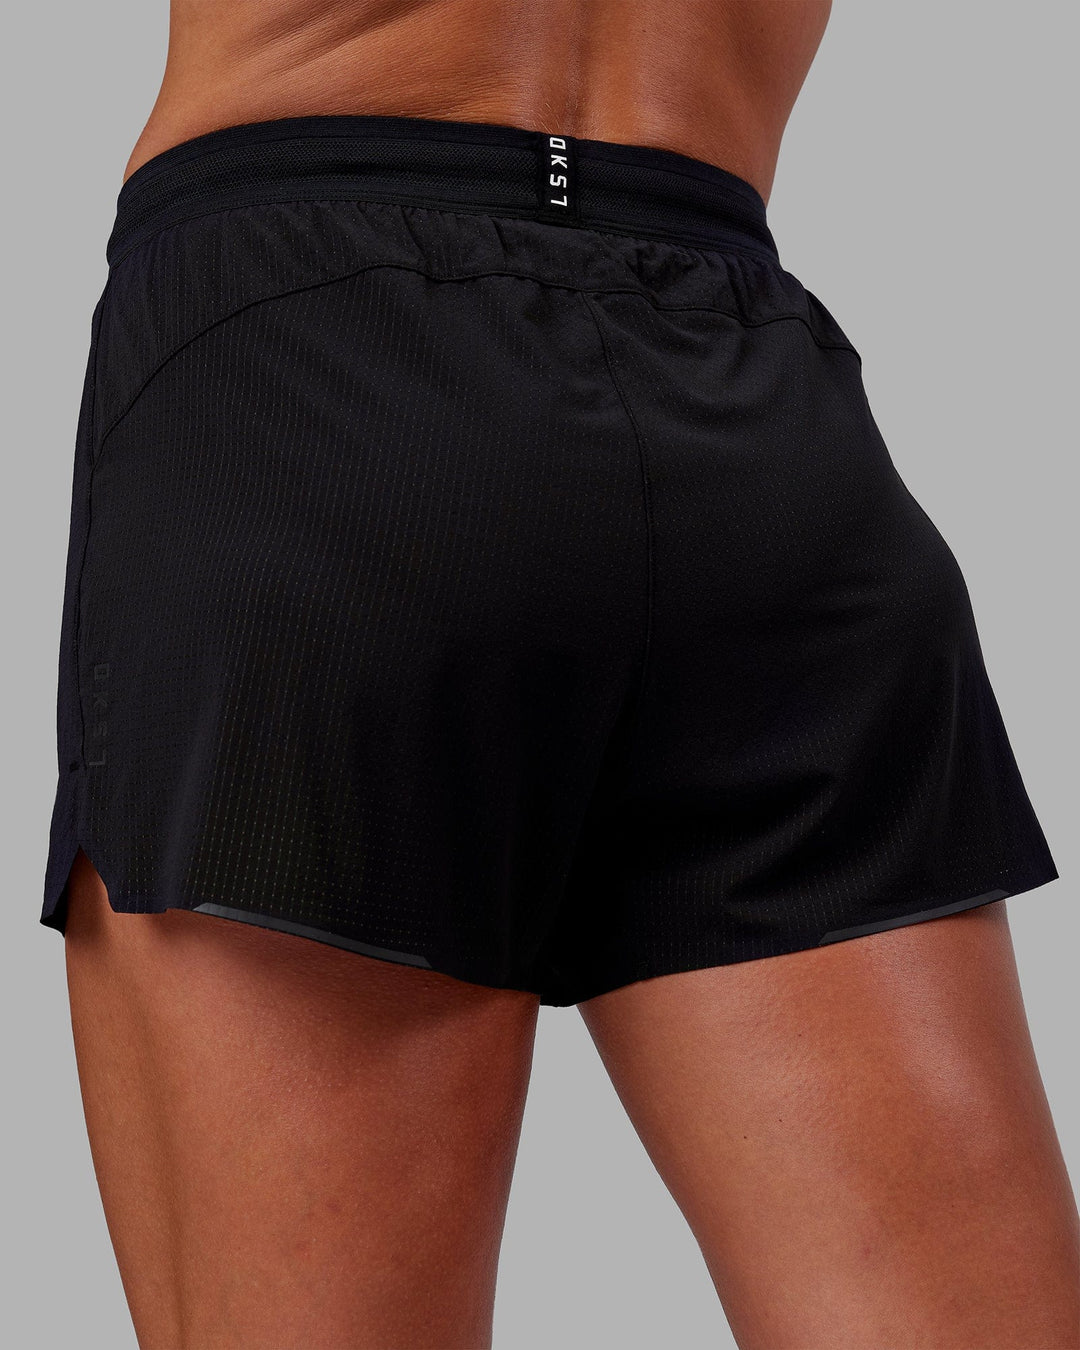 Woman wearing Ultra Air Lined Performance Short - Black